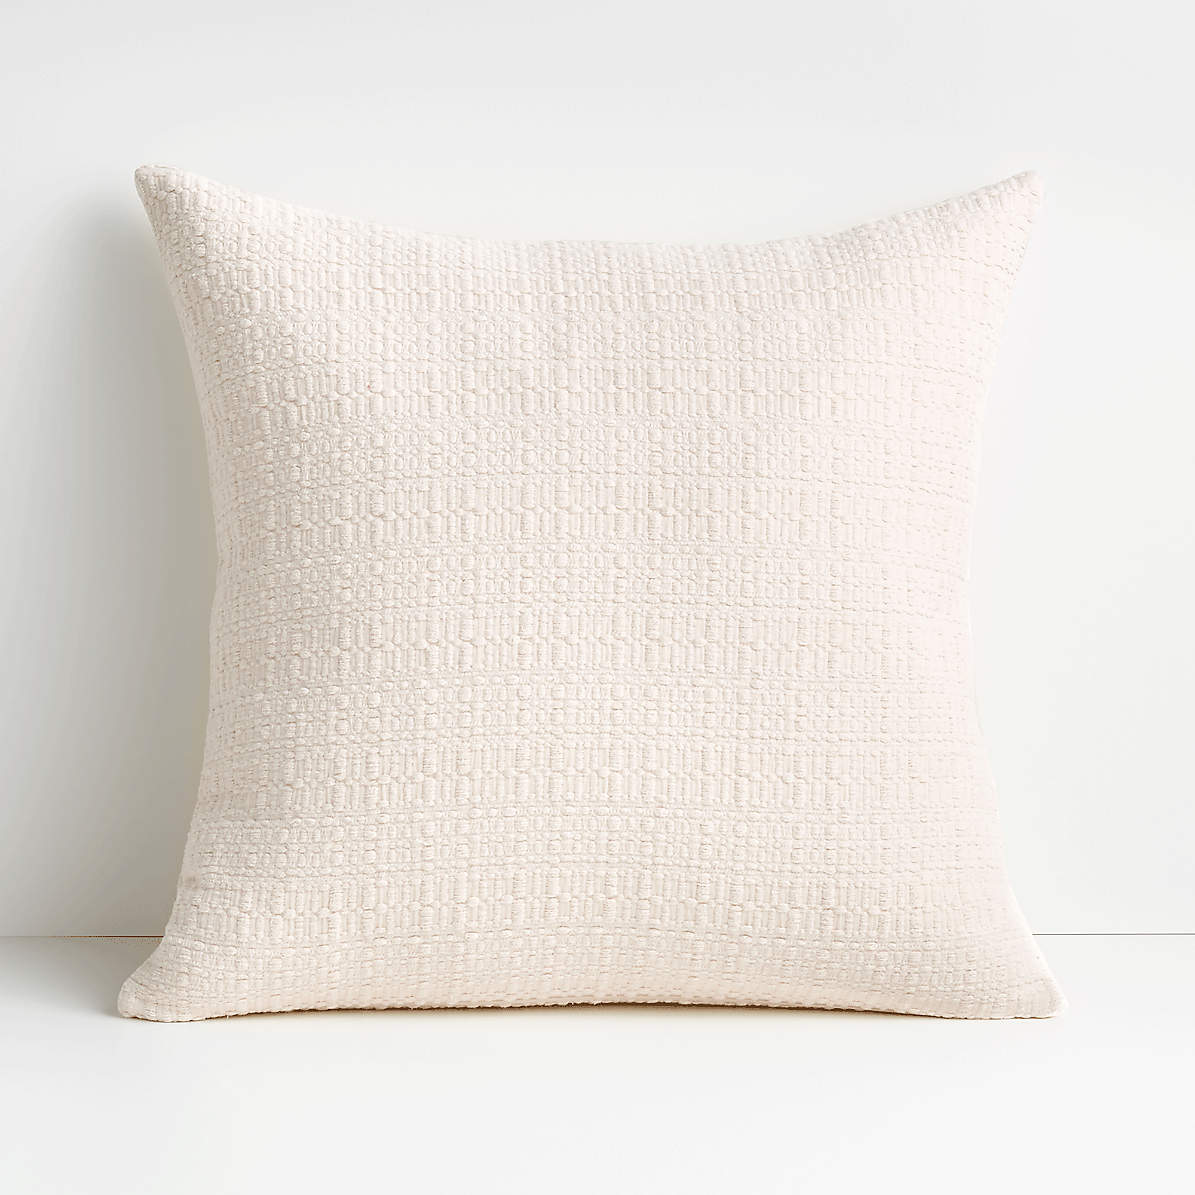  LiBcmlian White Knitted Throw Pillow Covers 20x20 Set